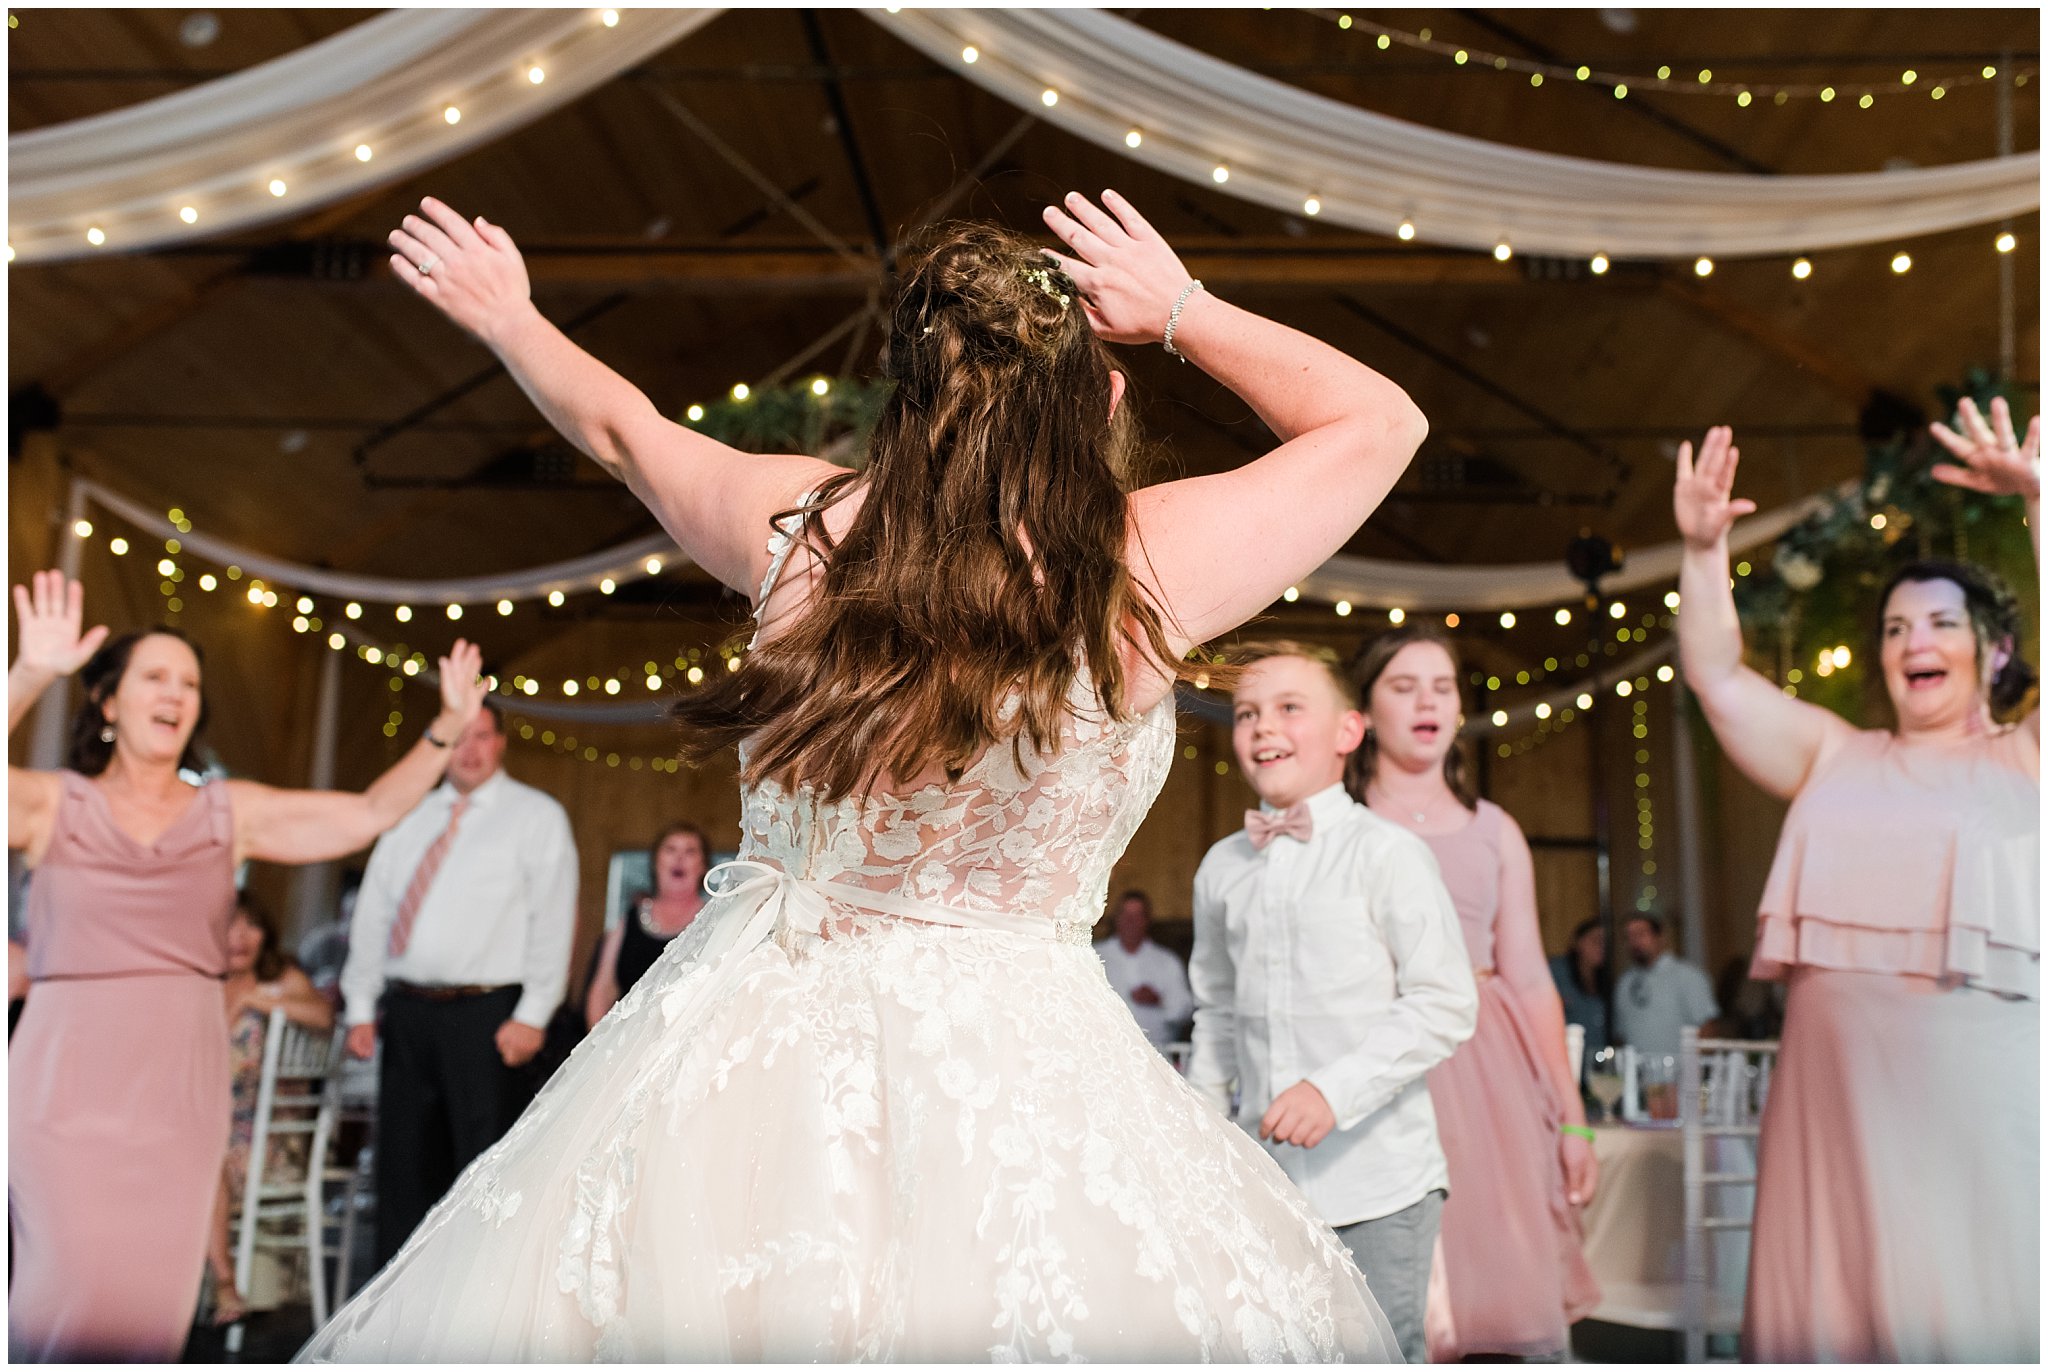 Bride busting a move during party dancing in barn | Oak Hills Utah Dusty Rose and Gray Summer Wedding | Jessie and Dallin Photography